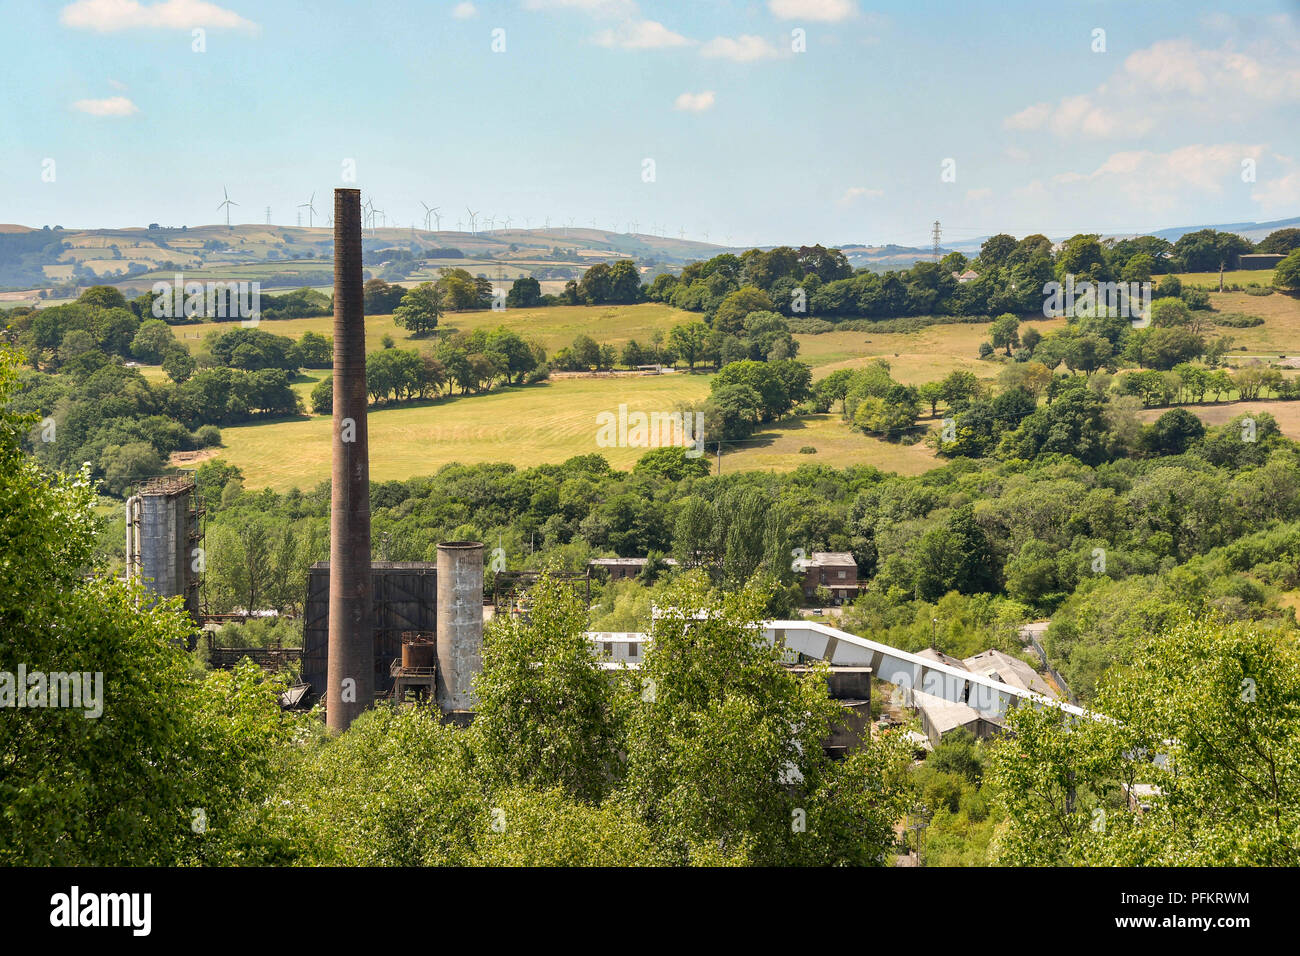 Derelict buildings  and chimney stack on the site of the former Cwm colliery and coke ovens in Beddau near Pontypridd, Wales. Stock Photo